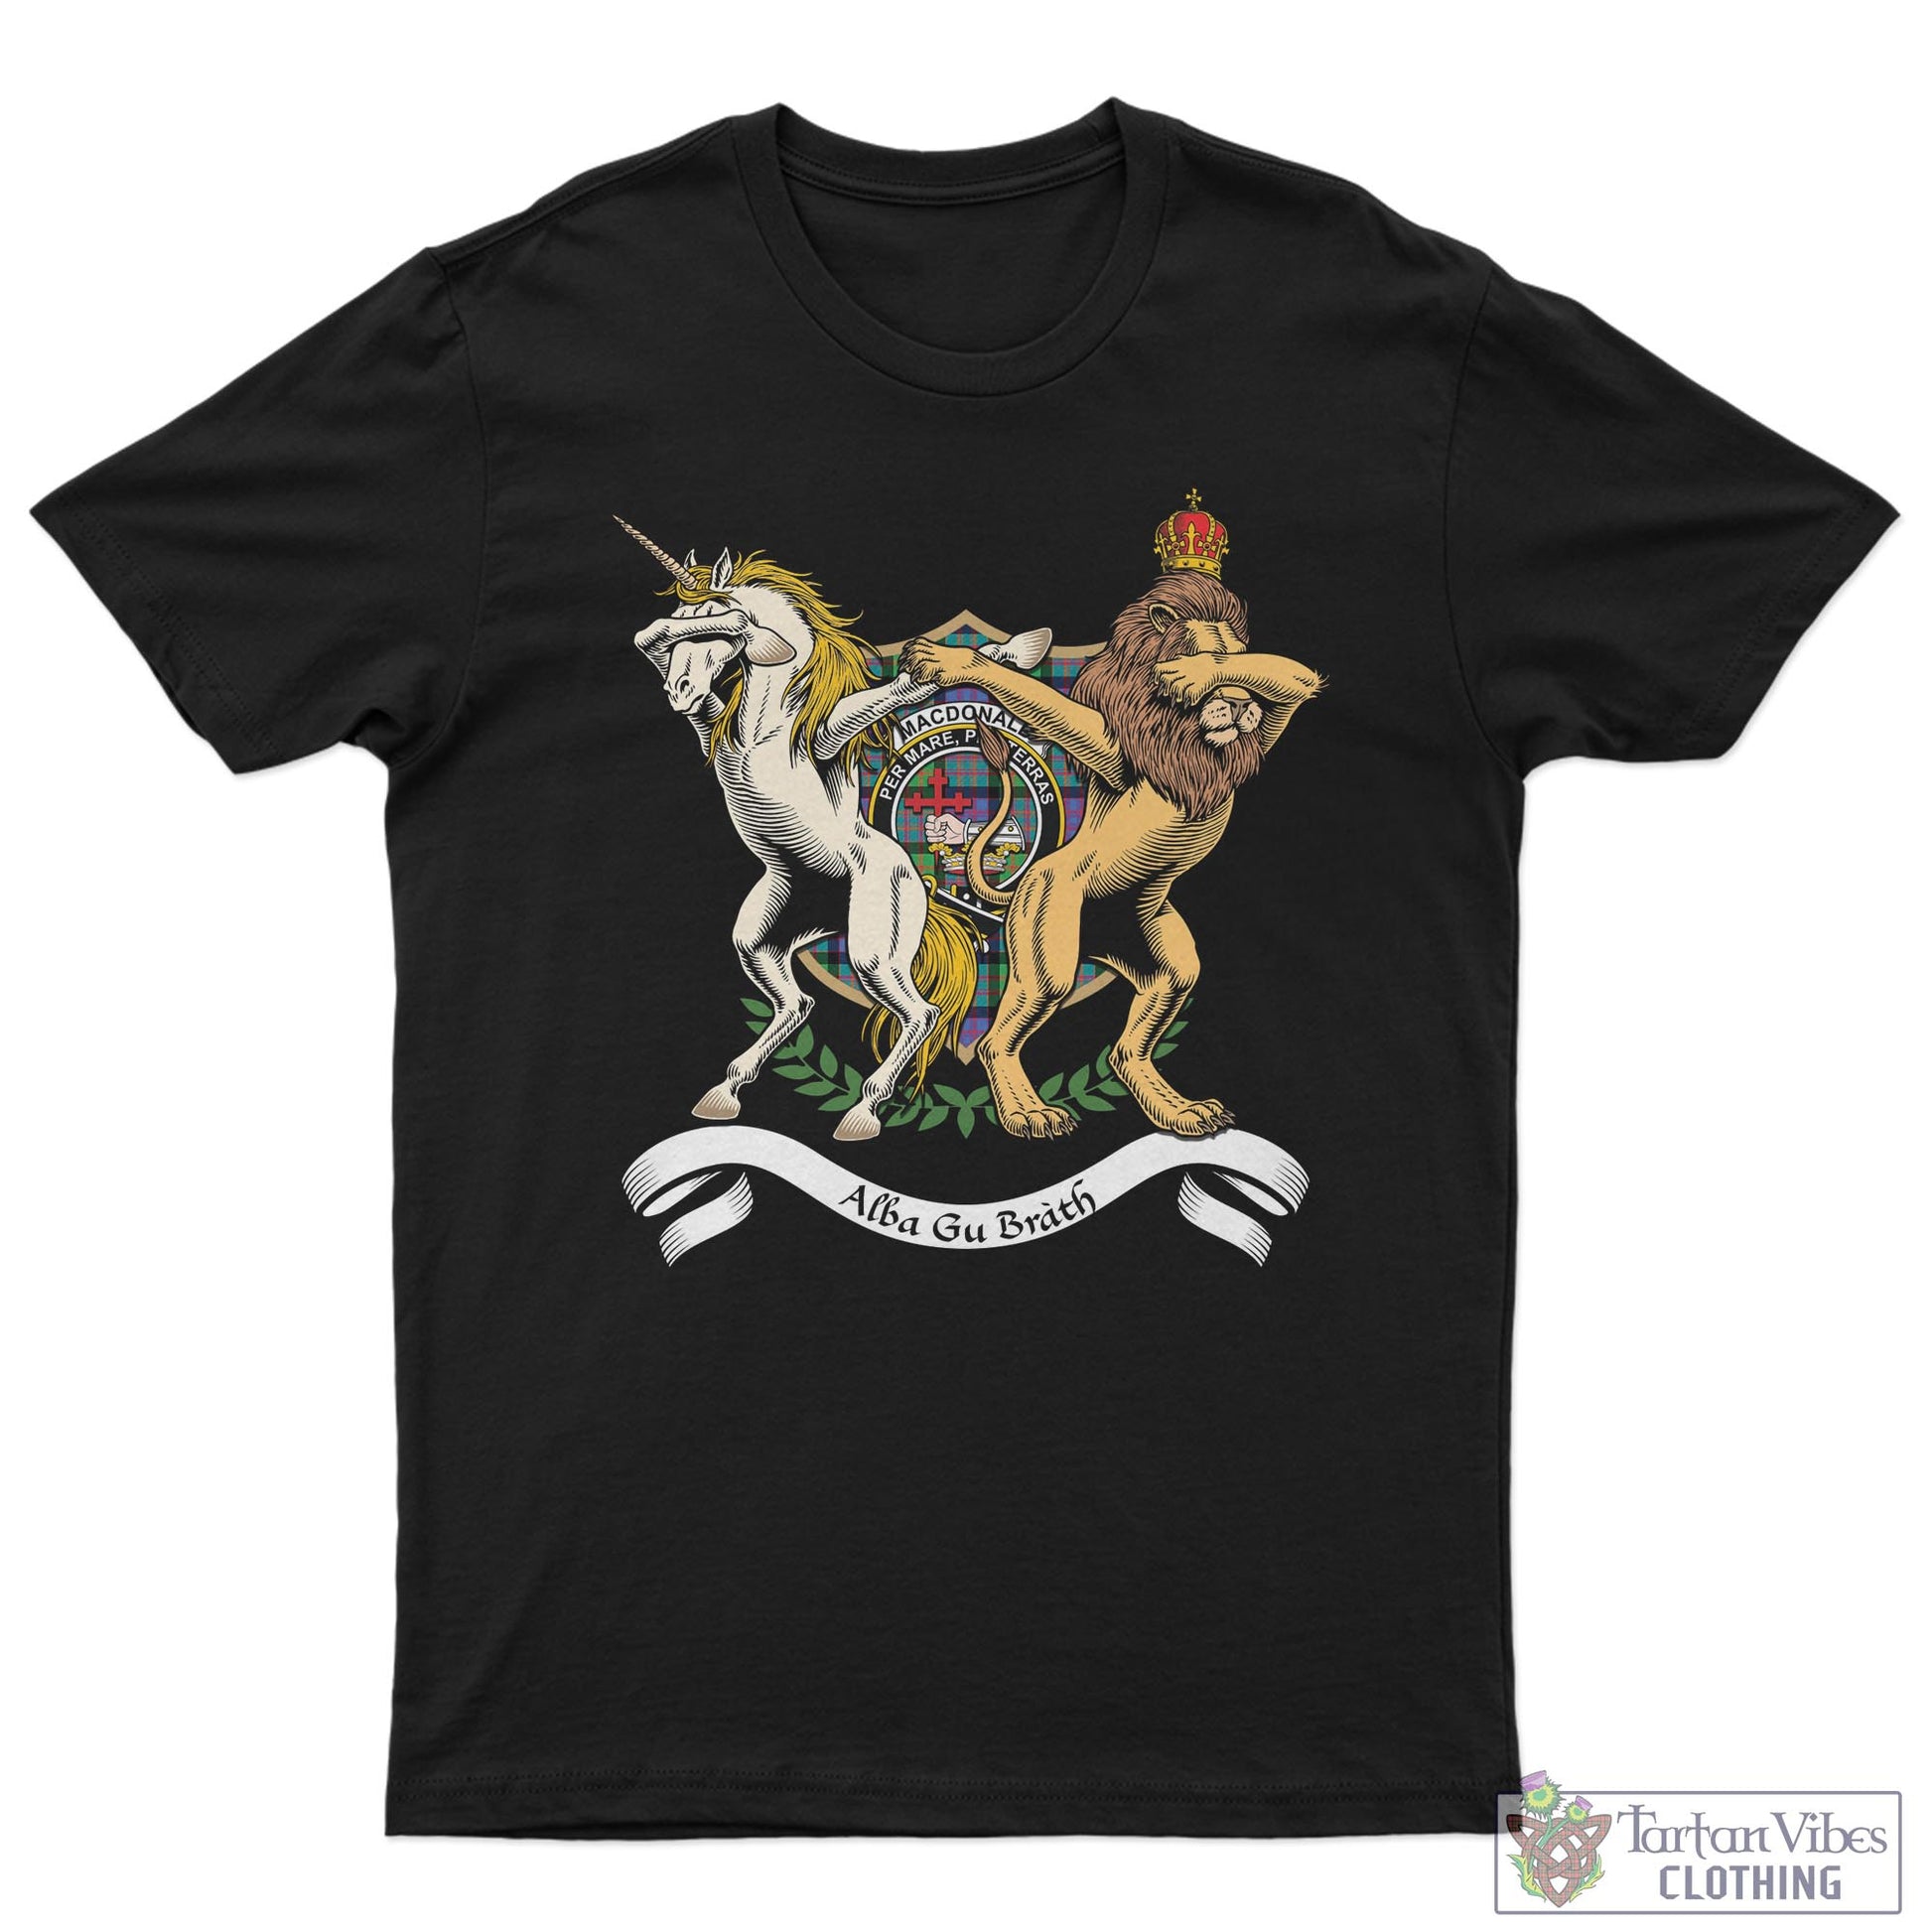 Tartan Vibes Clothing MacDonald Ancient Family Crest Cotton Men's T-Shirt with Scotland Royal Coat Of Arm Funny Style